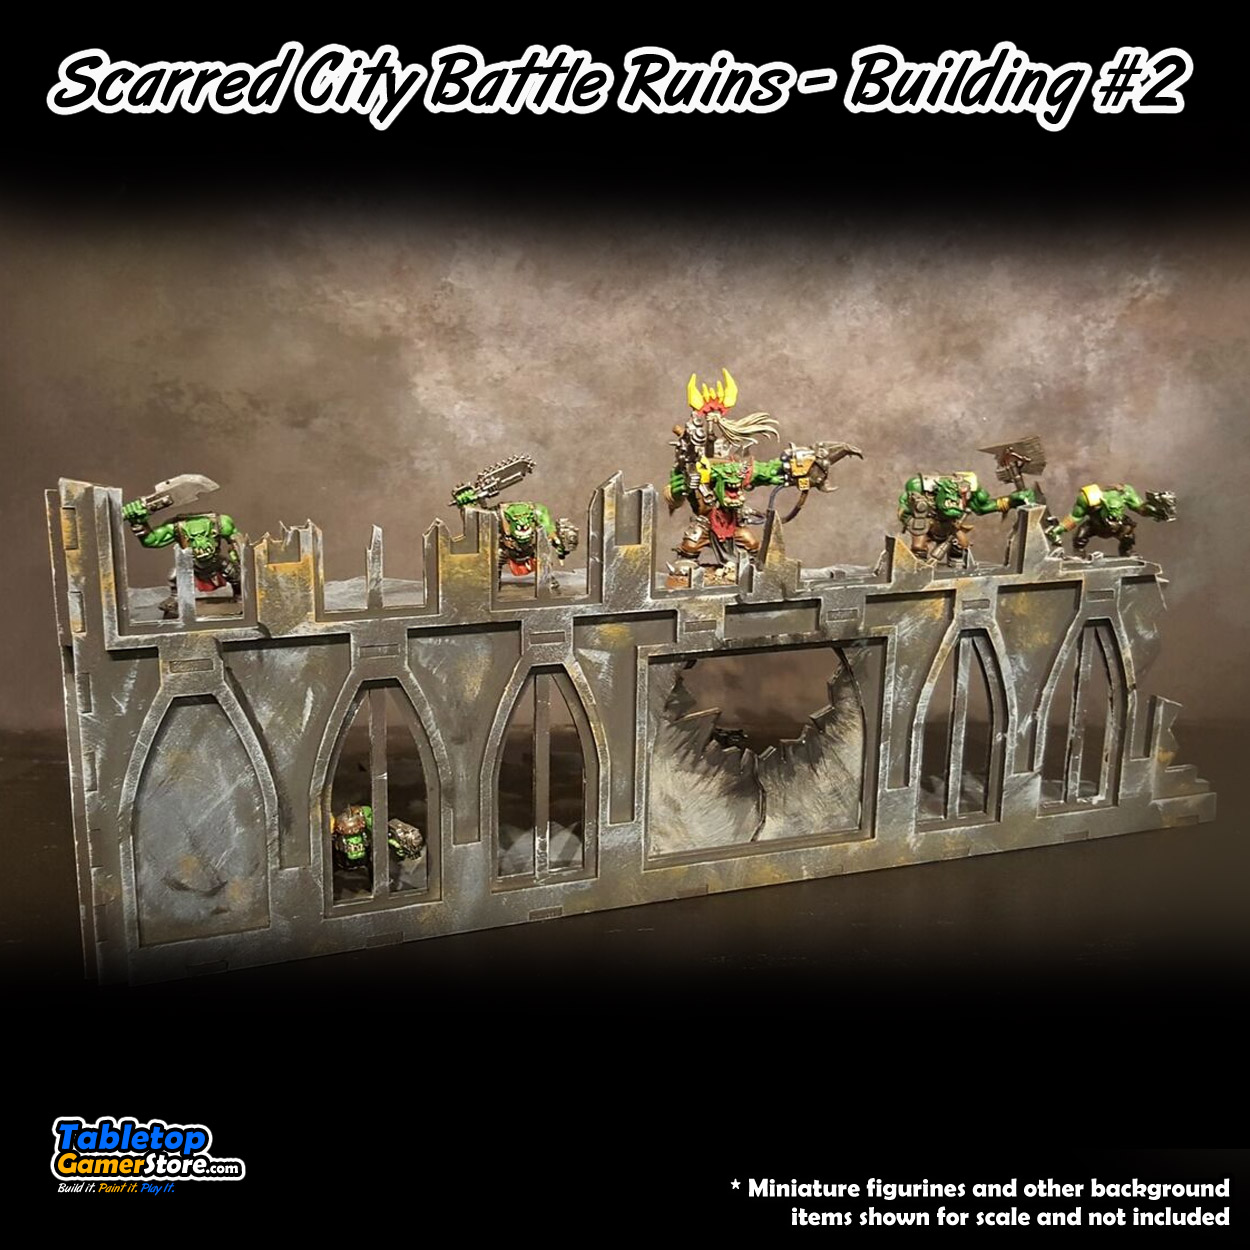 Scarred City Battle Ruins Building #2 – Now Available!